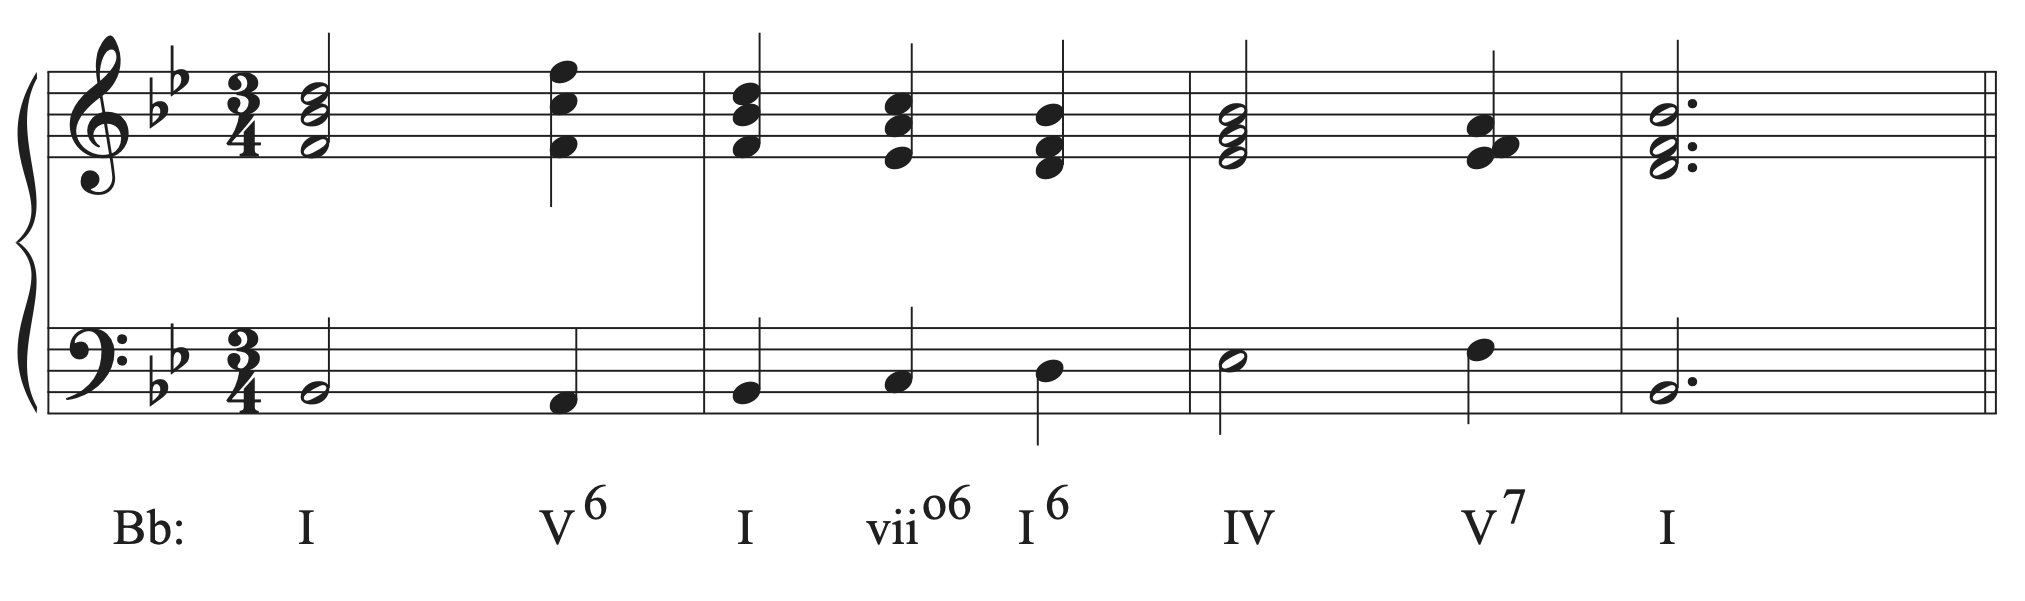 A musical example with a functional harmonic progression.